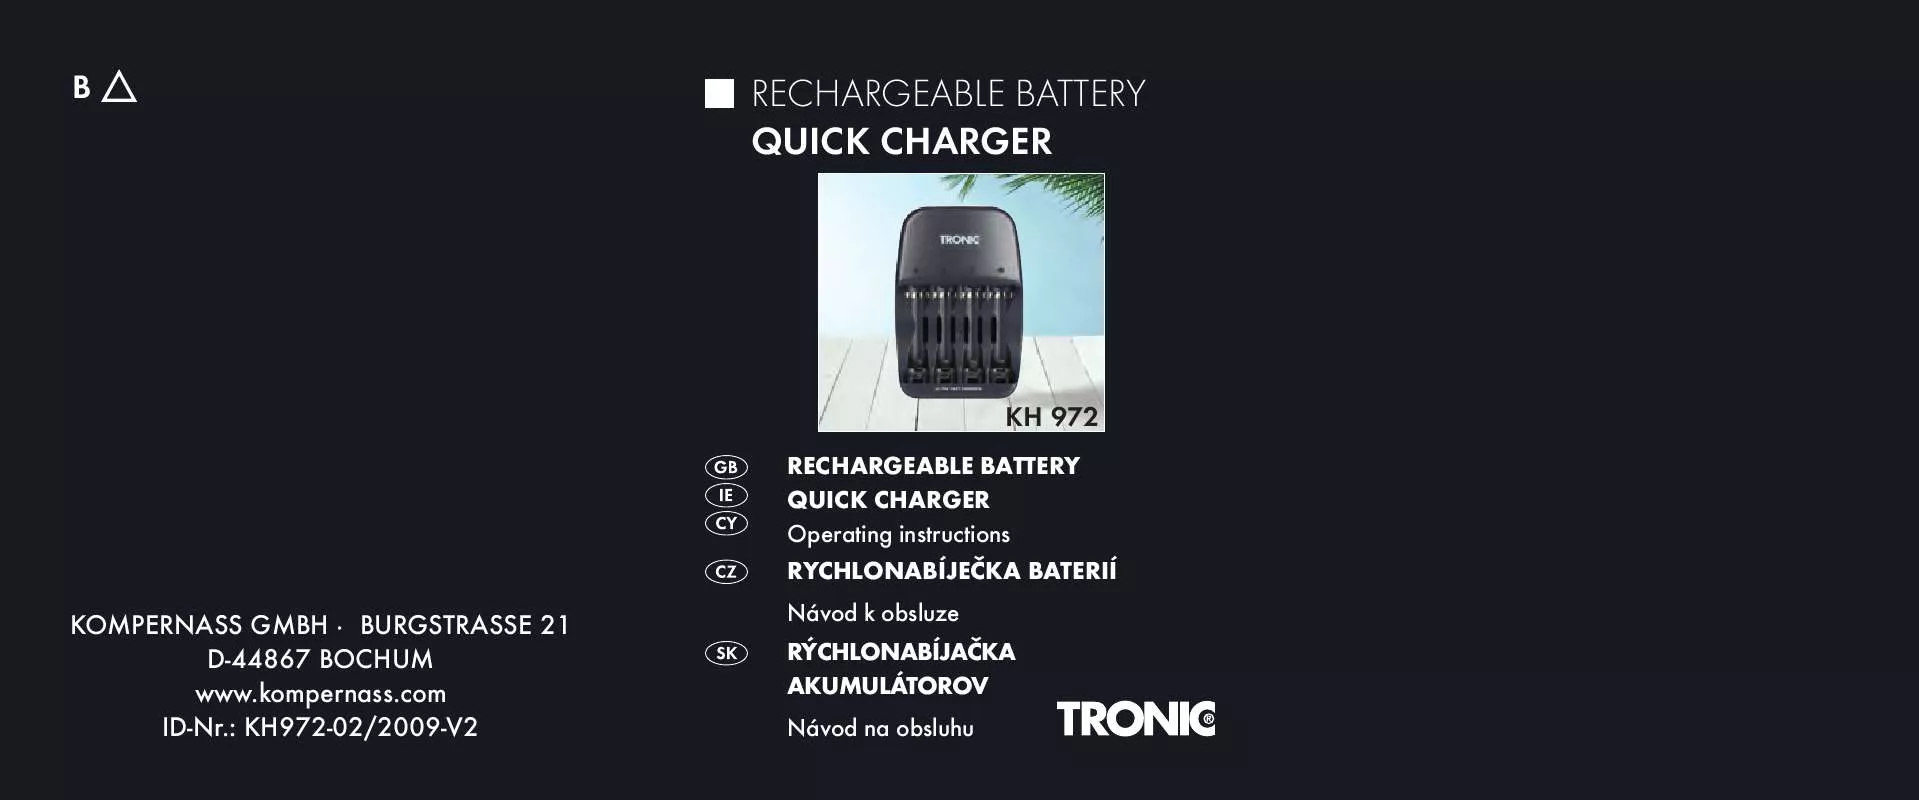 Mode d'emploi TRONIC KH 972 RECHARGEABLE BATTERY QUICK CHARGER